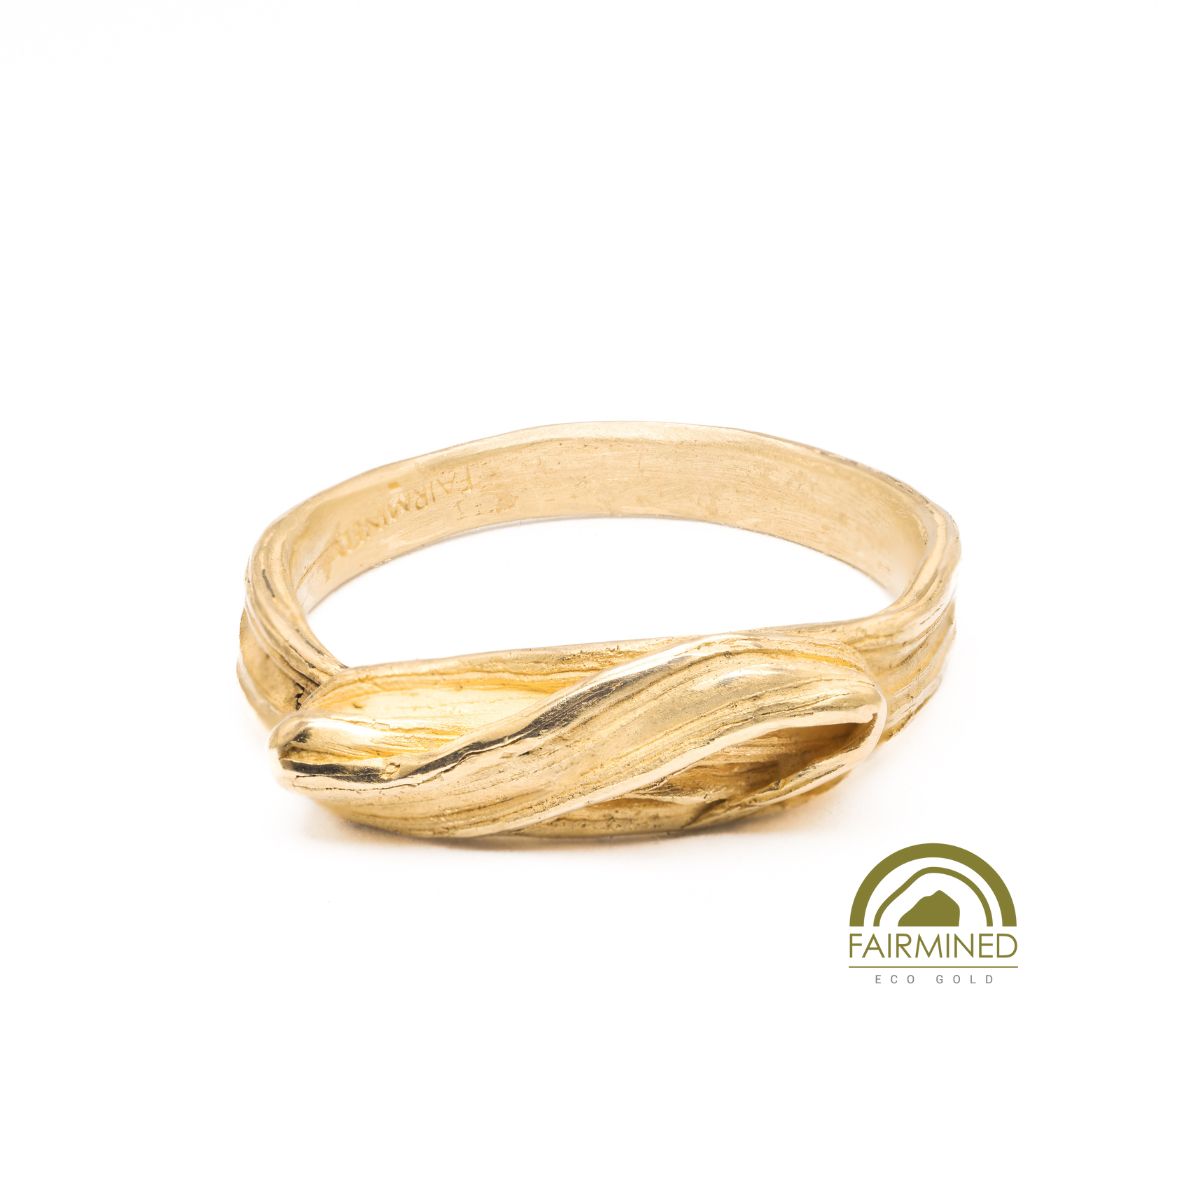 18k Fairmined Eco Sustainable Gold Ring sz 6.75 No 18 by Dorothee Rosen